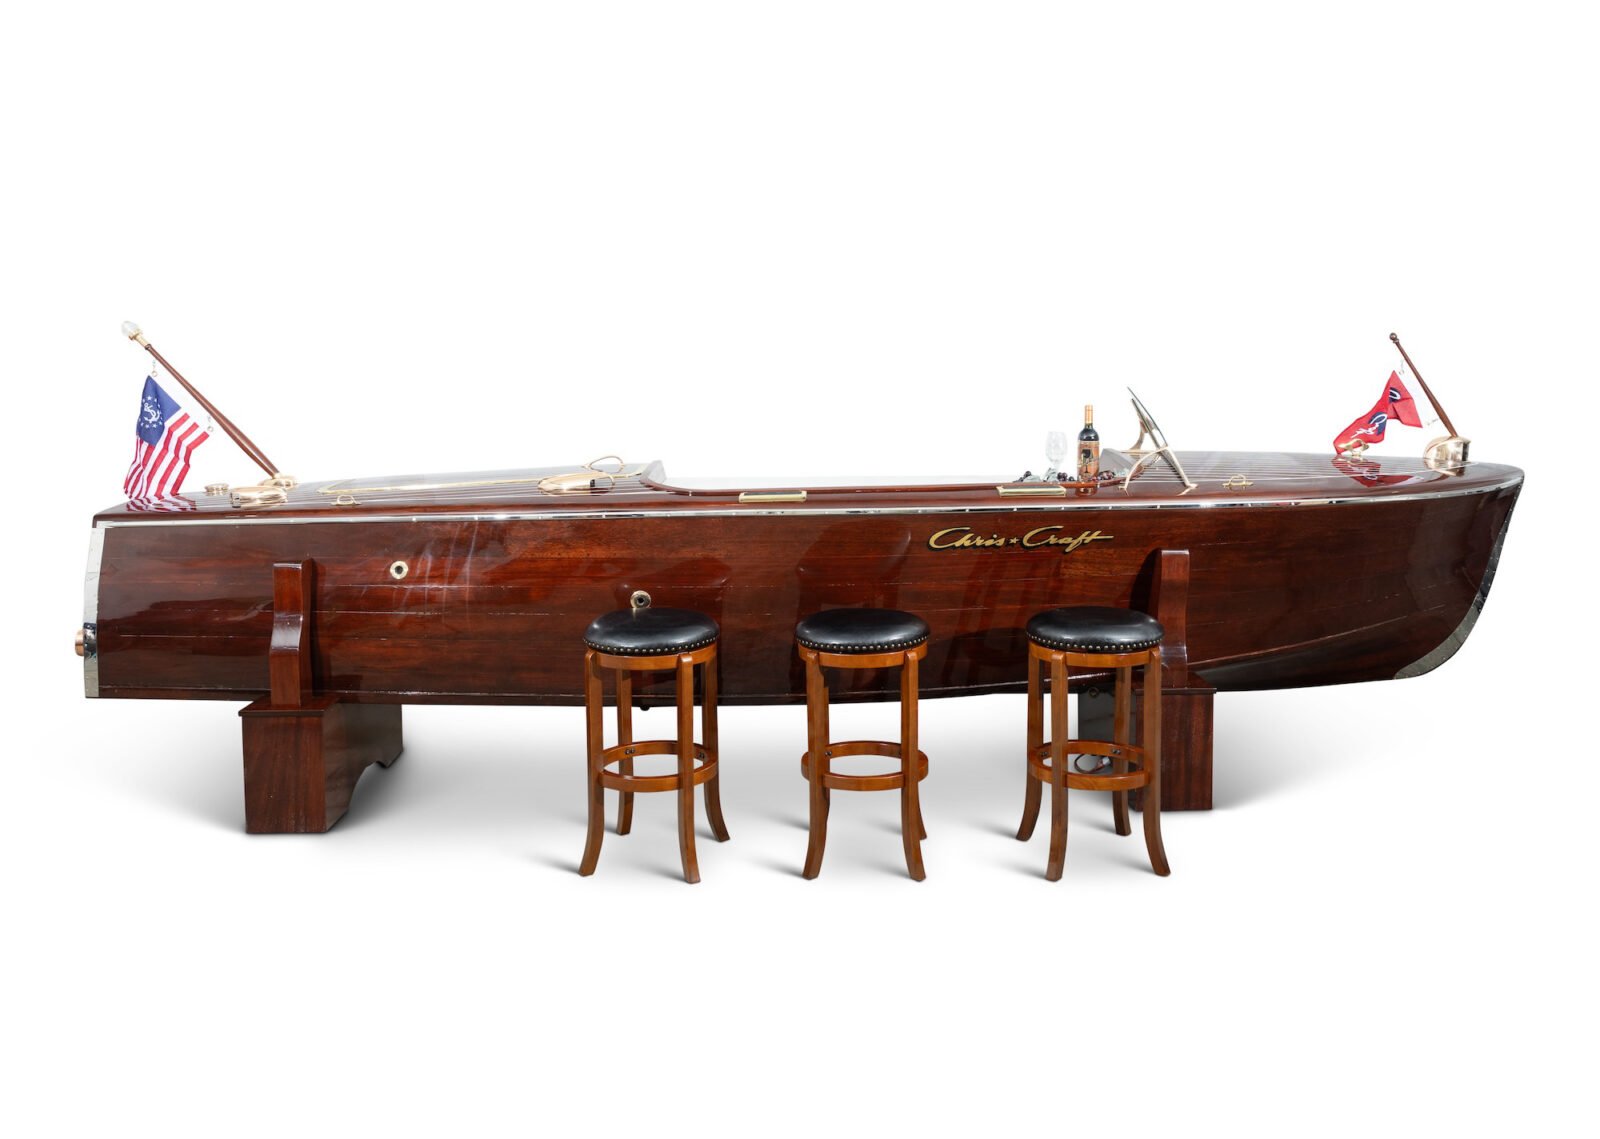 Chris-Craft Deluxe Runabout Boat Bar